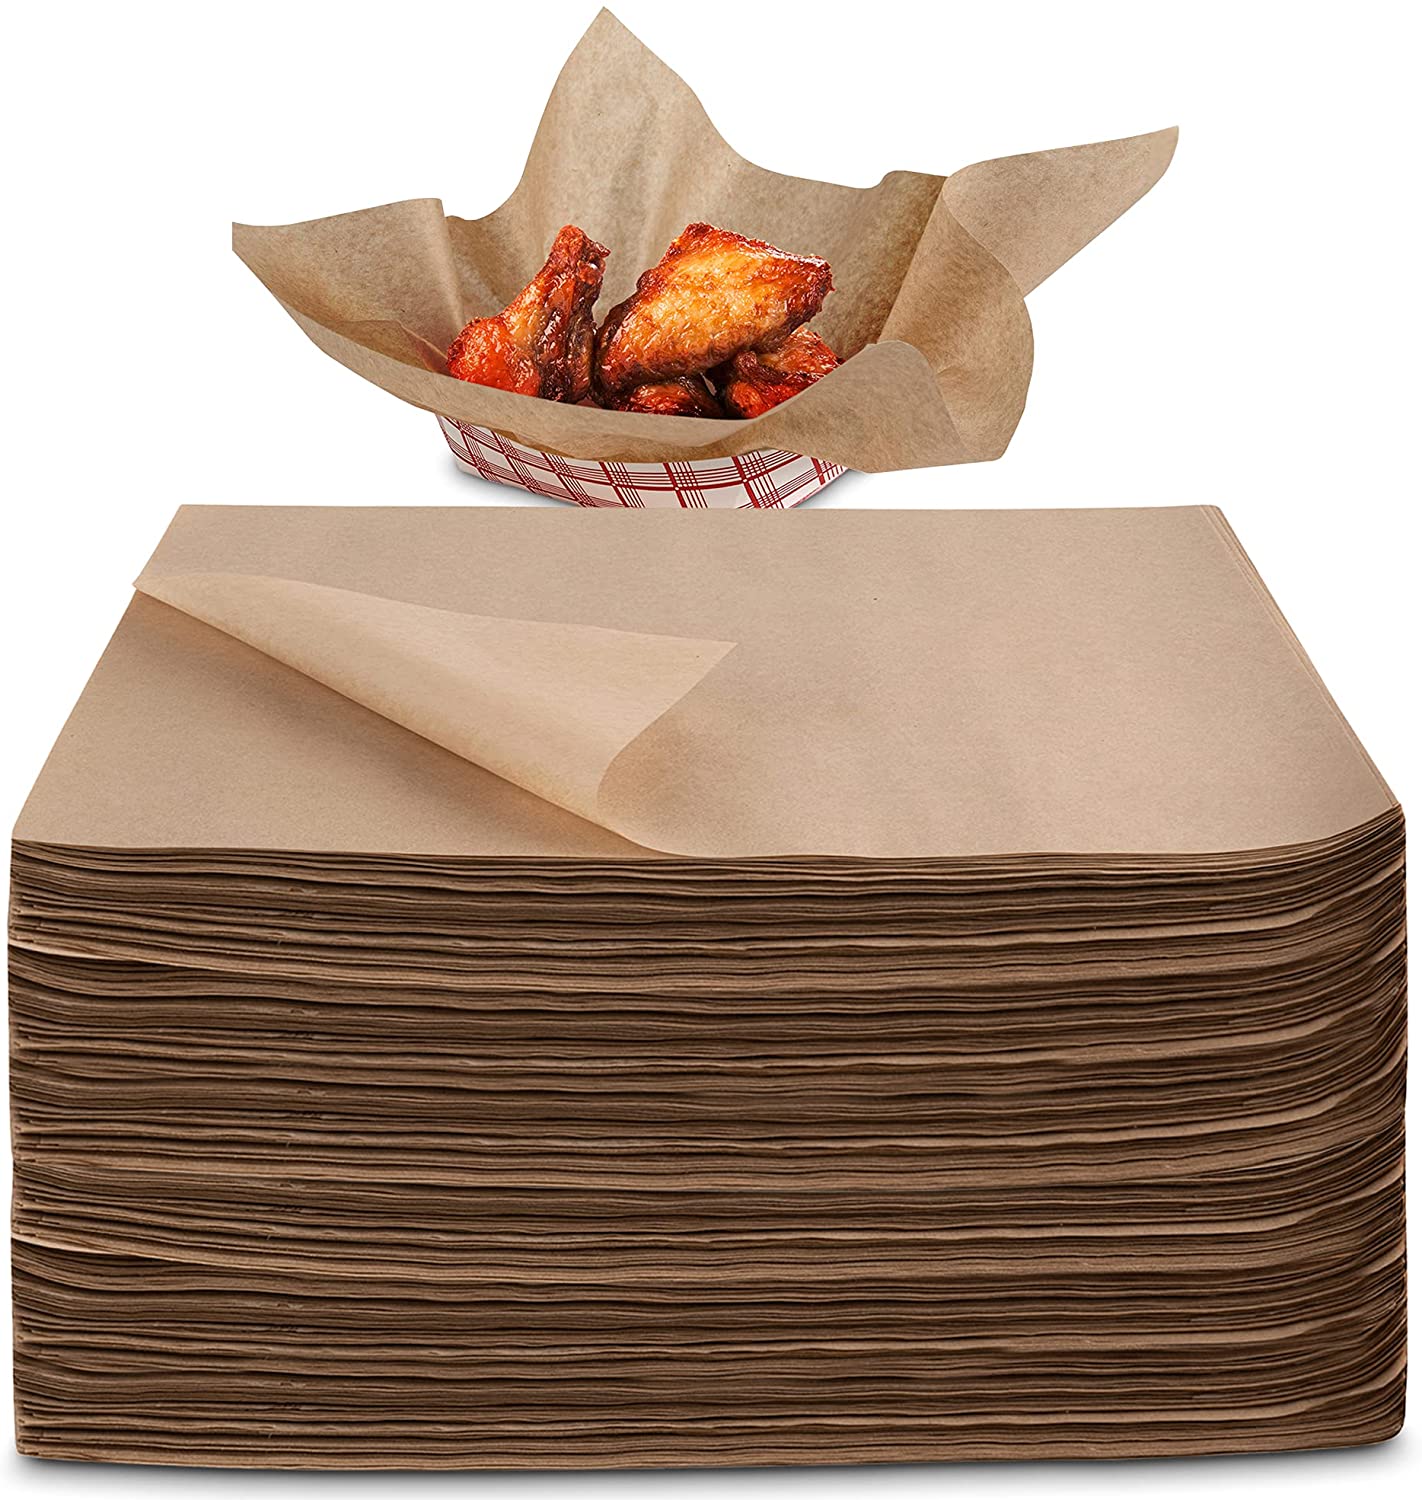 Stock Your Home 12 x 12 Grease Proof Deli Wrappers (500 Pack) - Pre Cu